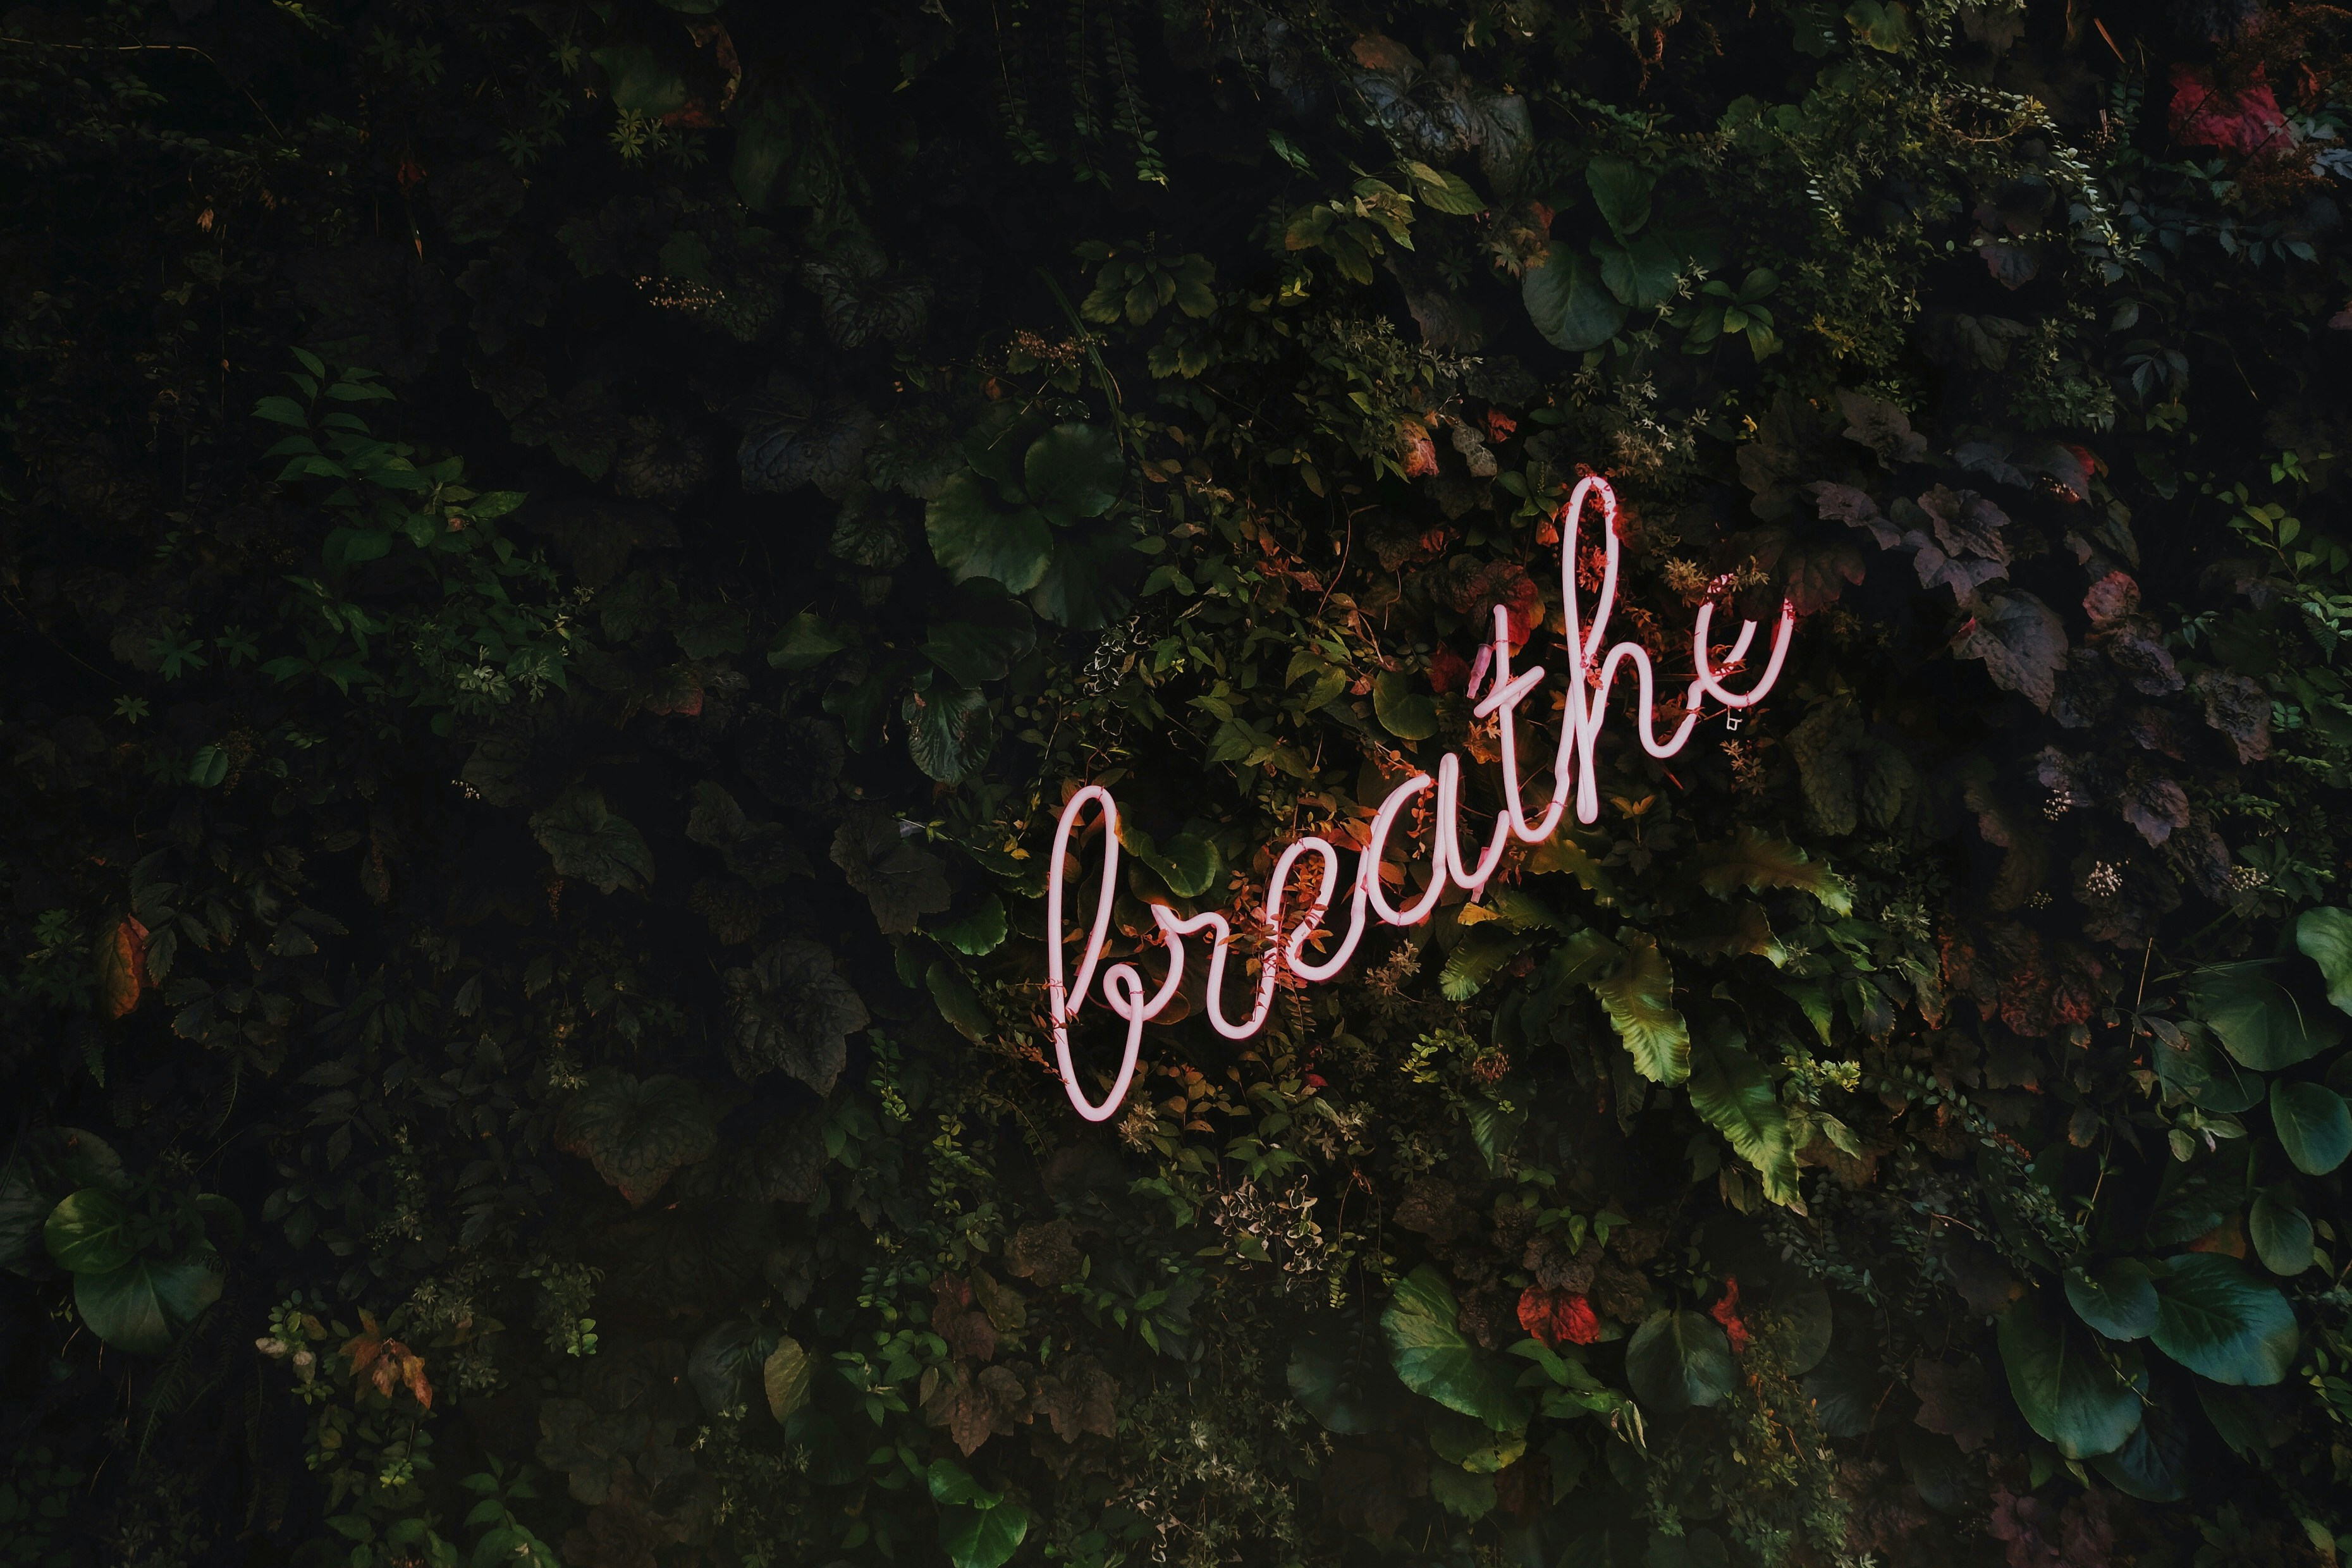 …breathe!</p>
<p>For a full size digital copy (6000x4000px RAW+JPG) of this file, or a high quality print, please contact me via instagram: @timothy.j.goedhart, or email: tim@goedhart-lin.nl</p>
<p>That file would be free to use for any means except direct reselling (copywrite is included in metadata).</p>
<p>When using this free image online: please tag, credit and if you want, follow me on Instagram.” style=”max-width:430px;float:left;padding:10px 10px 10px 0px;border:0px;”><iframe width=